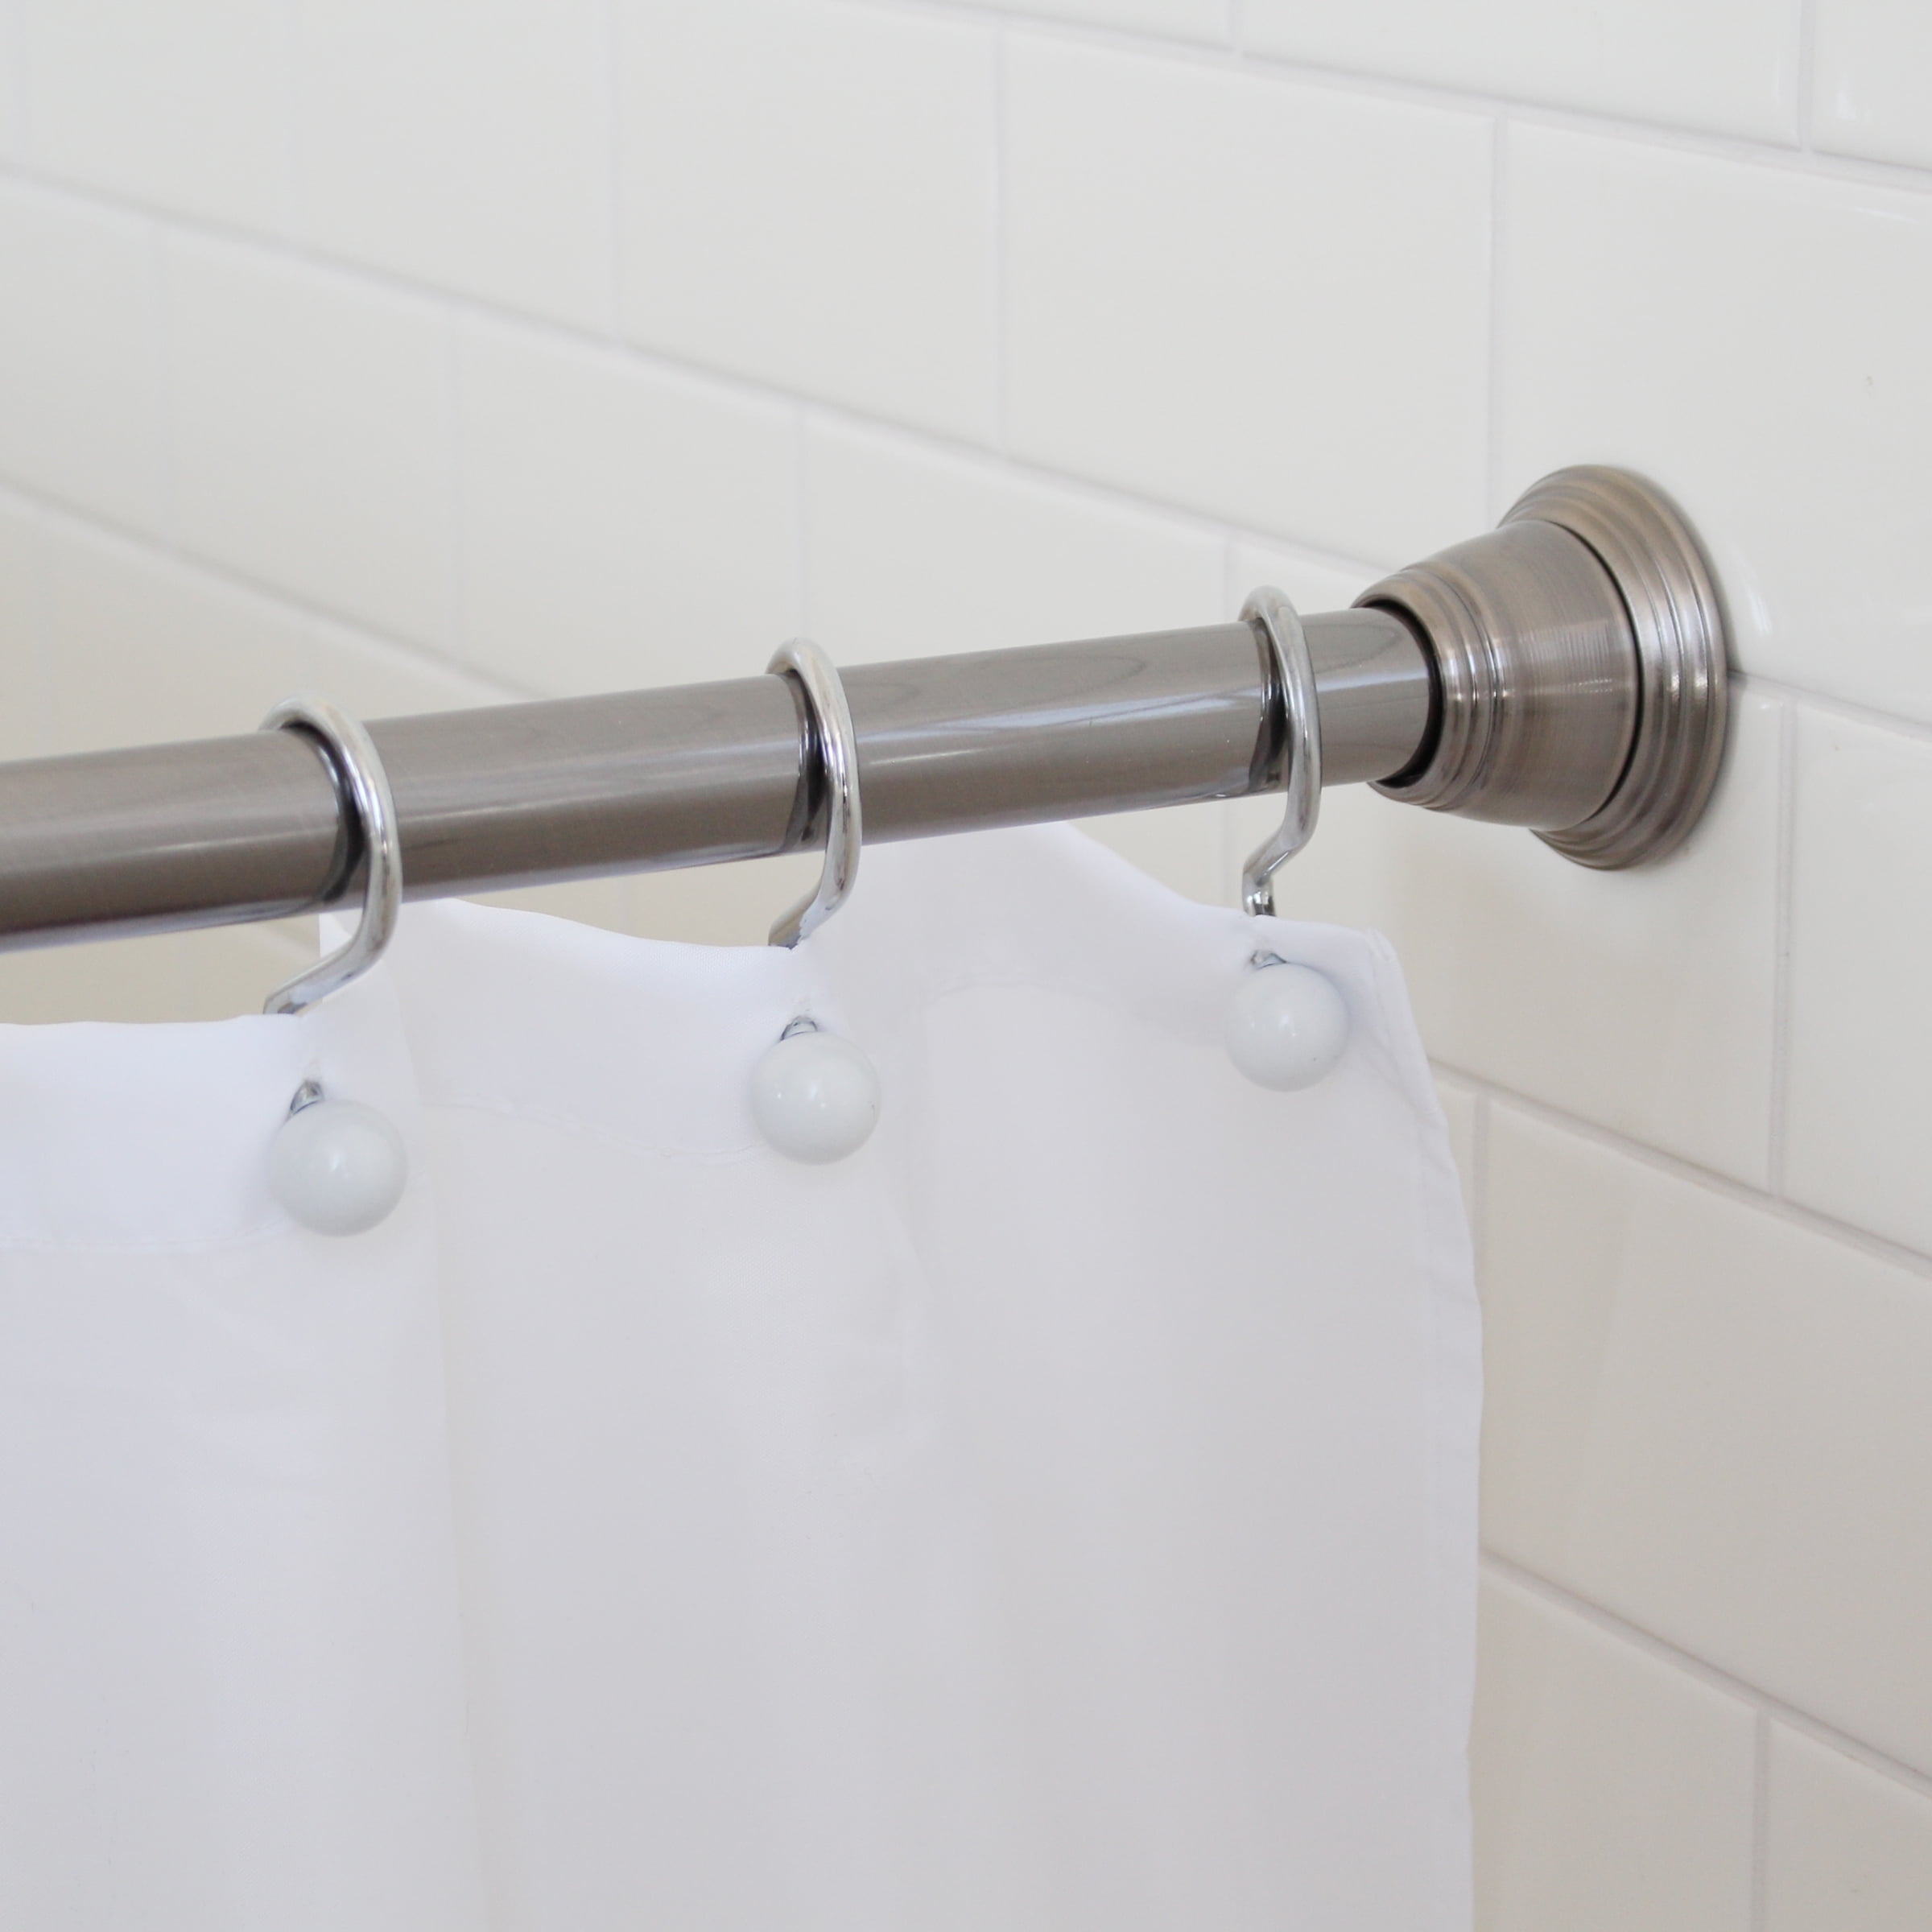 Splash Home Eire Rust Resistant Strong, How To Tighten A Shower Curtain Tension Rod